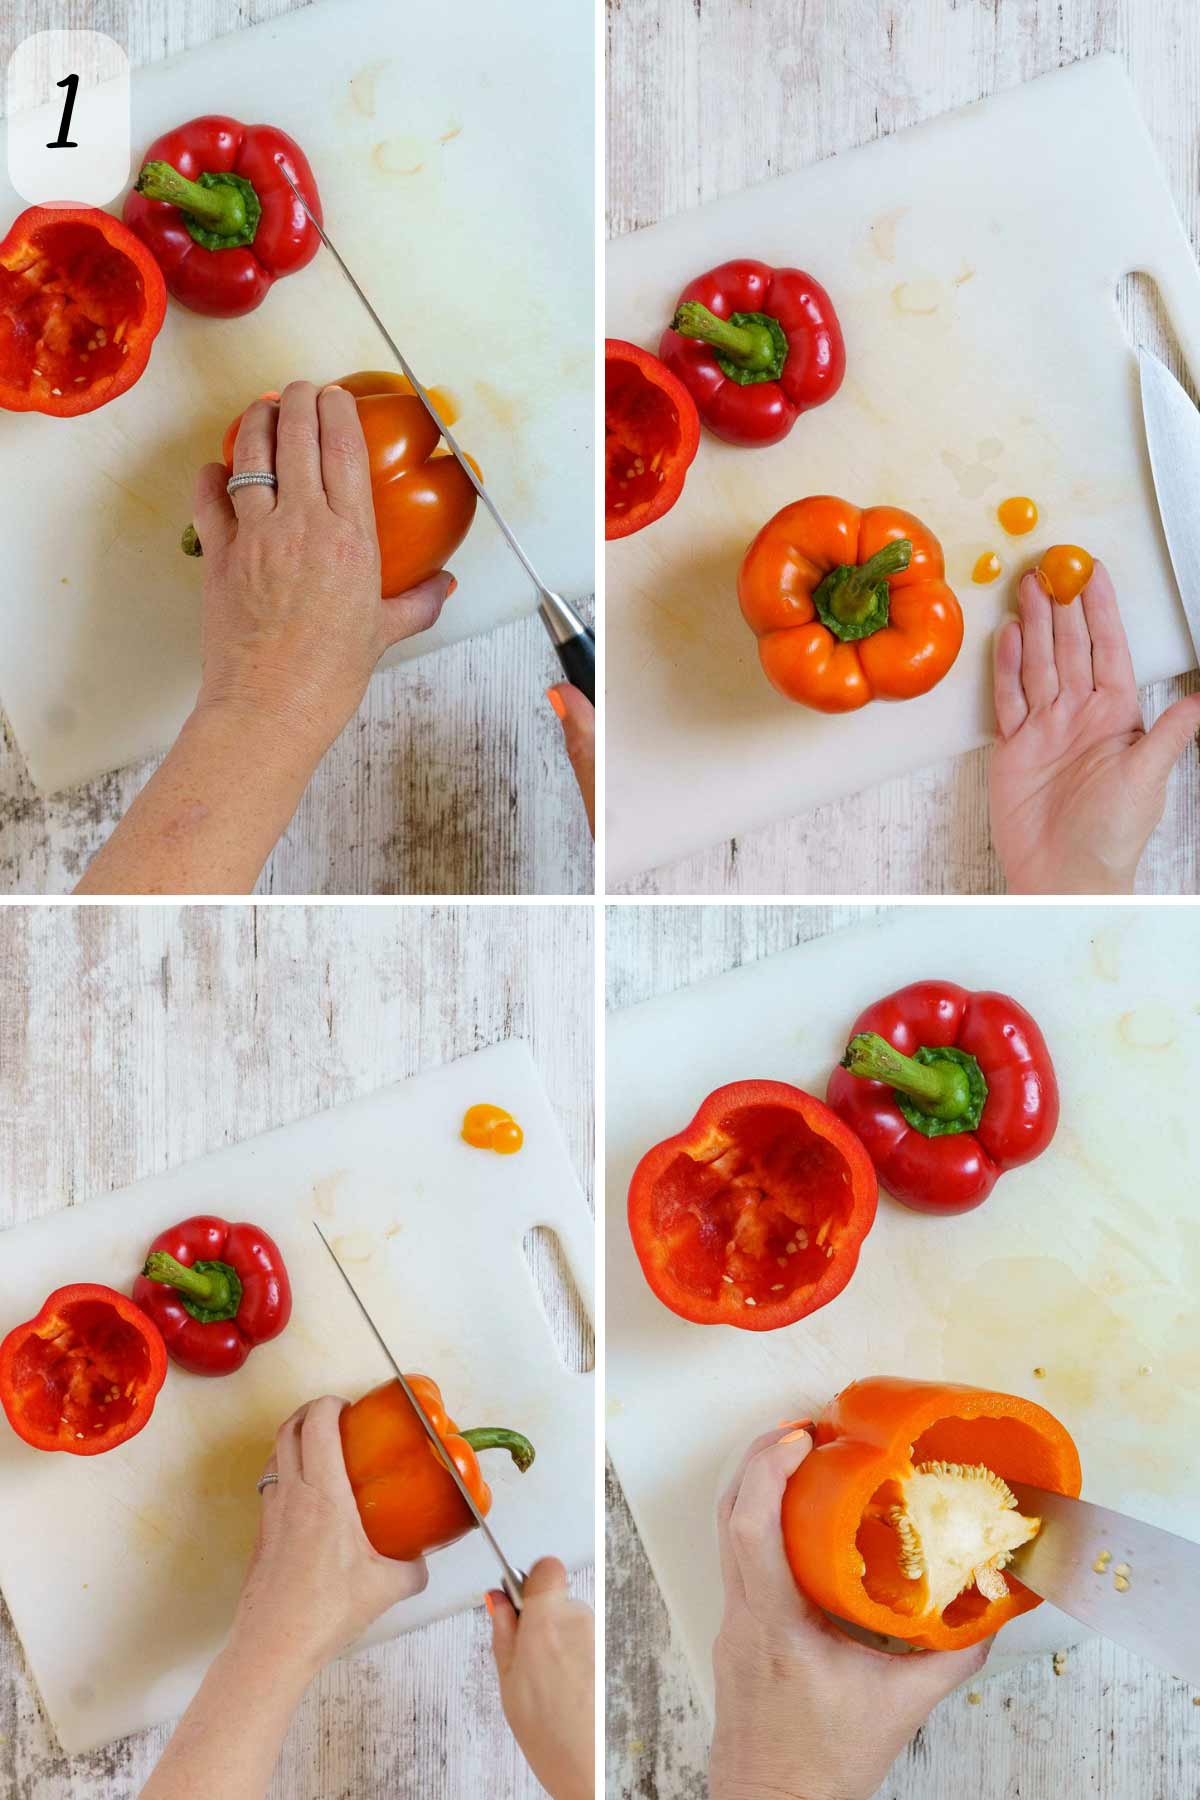 Cutting bell peppers an taking out the center veins.